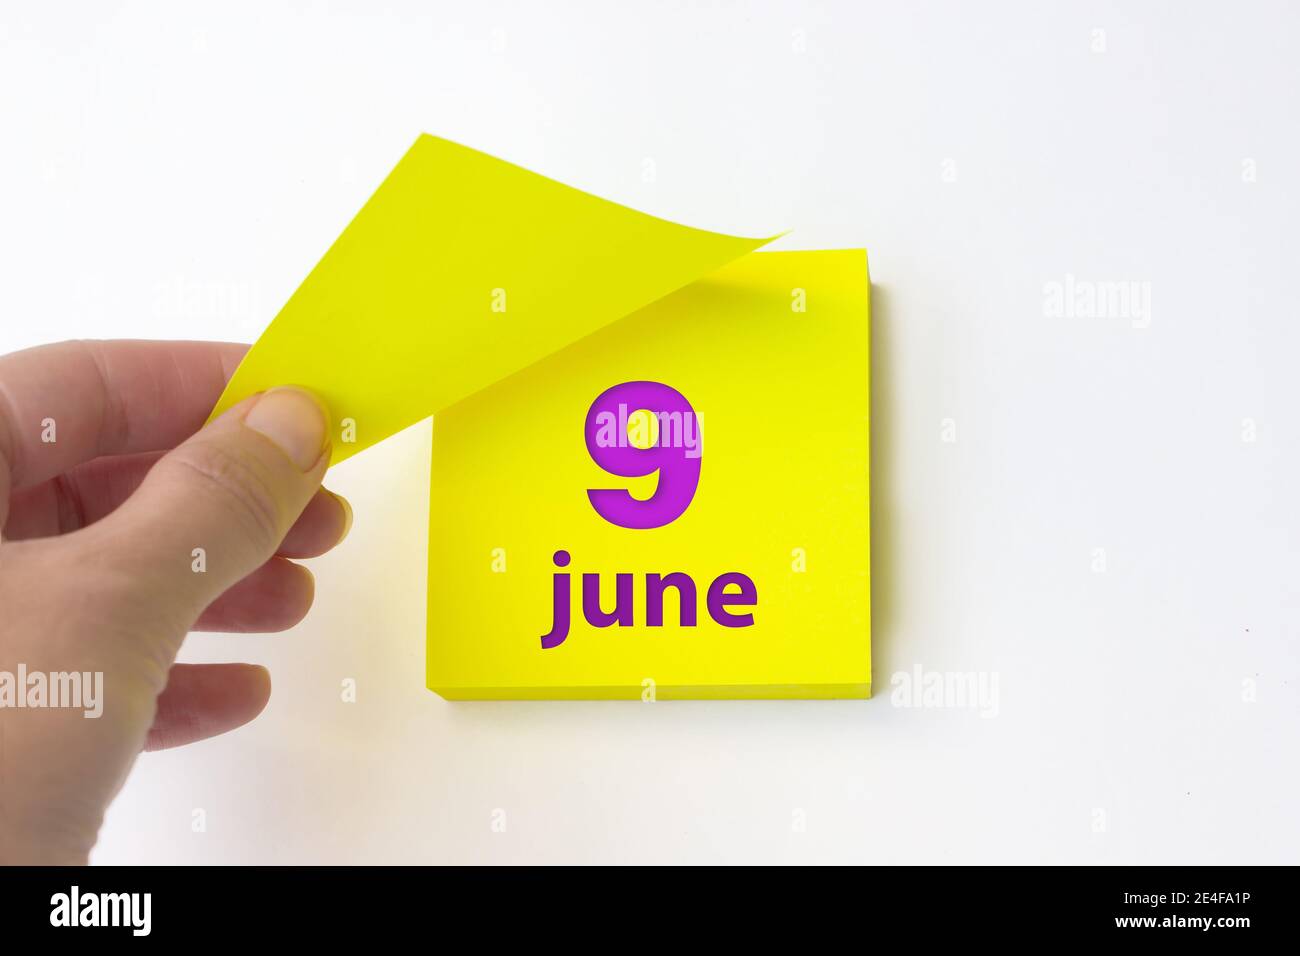 June 9th. Day 9 of month, Calendar date. Hand rips off the yellow sheet of the calendar. Summer month, day of the year concept Stock Photo